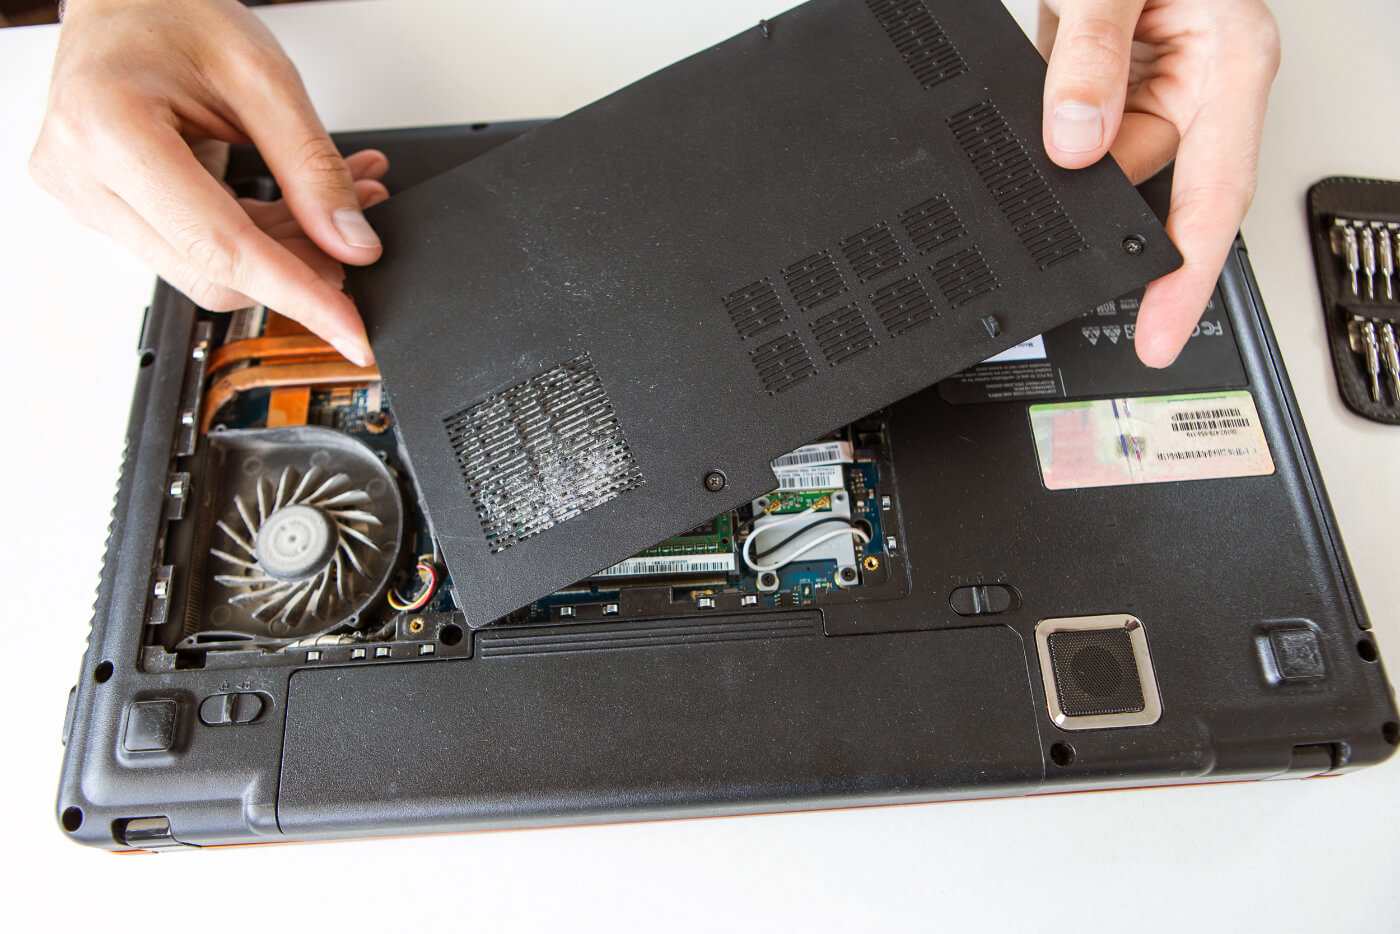 Dirty Laptop Fan Being Cleaned